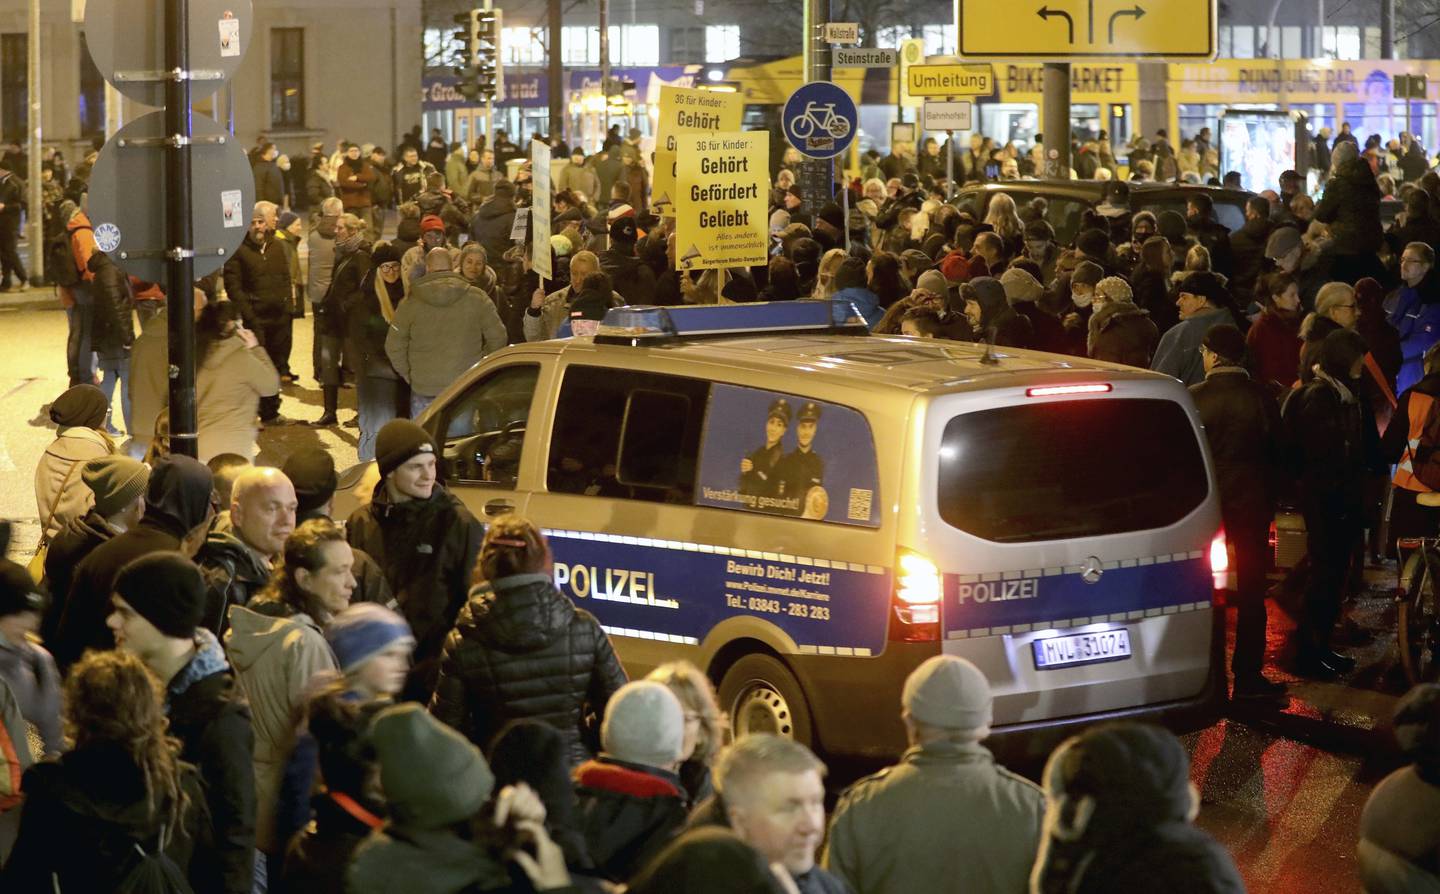 A protest against Covid restrictions in Rostock, eastern Germany, 
where the Telegram group under investigation was set up. Photo: AP 